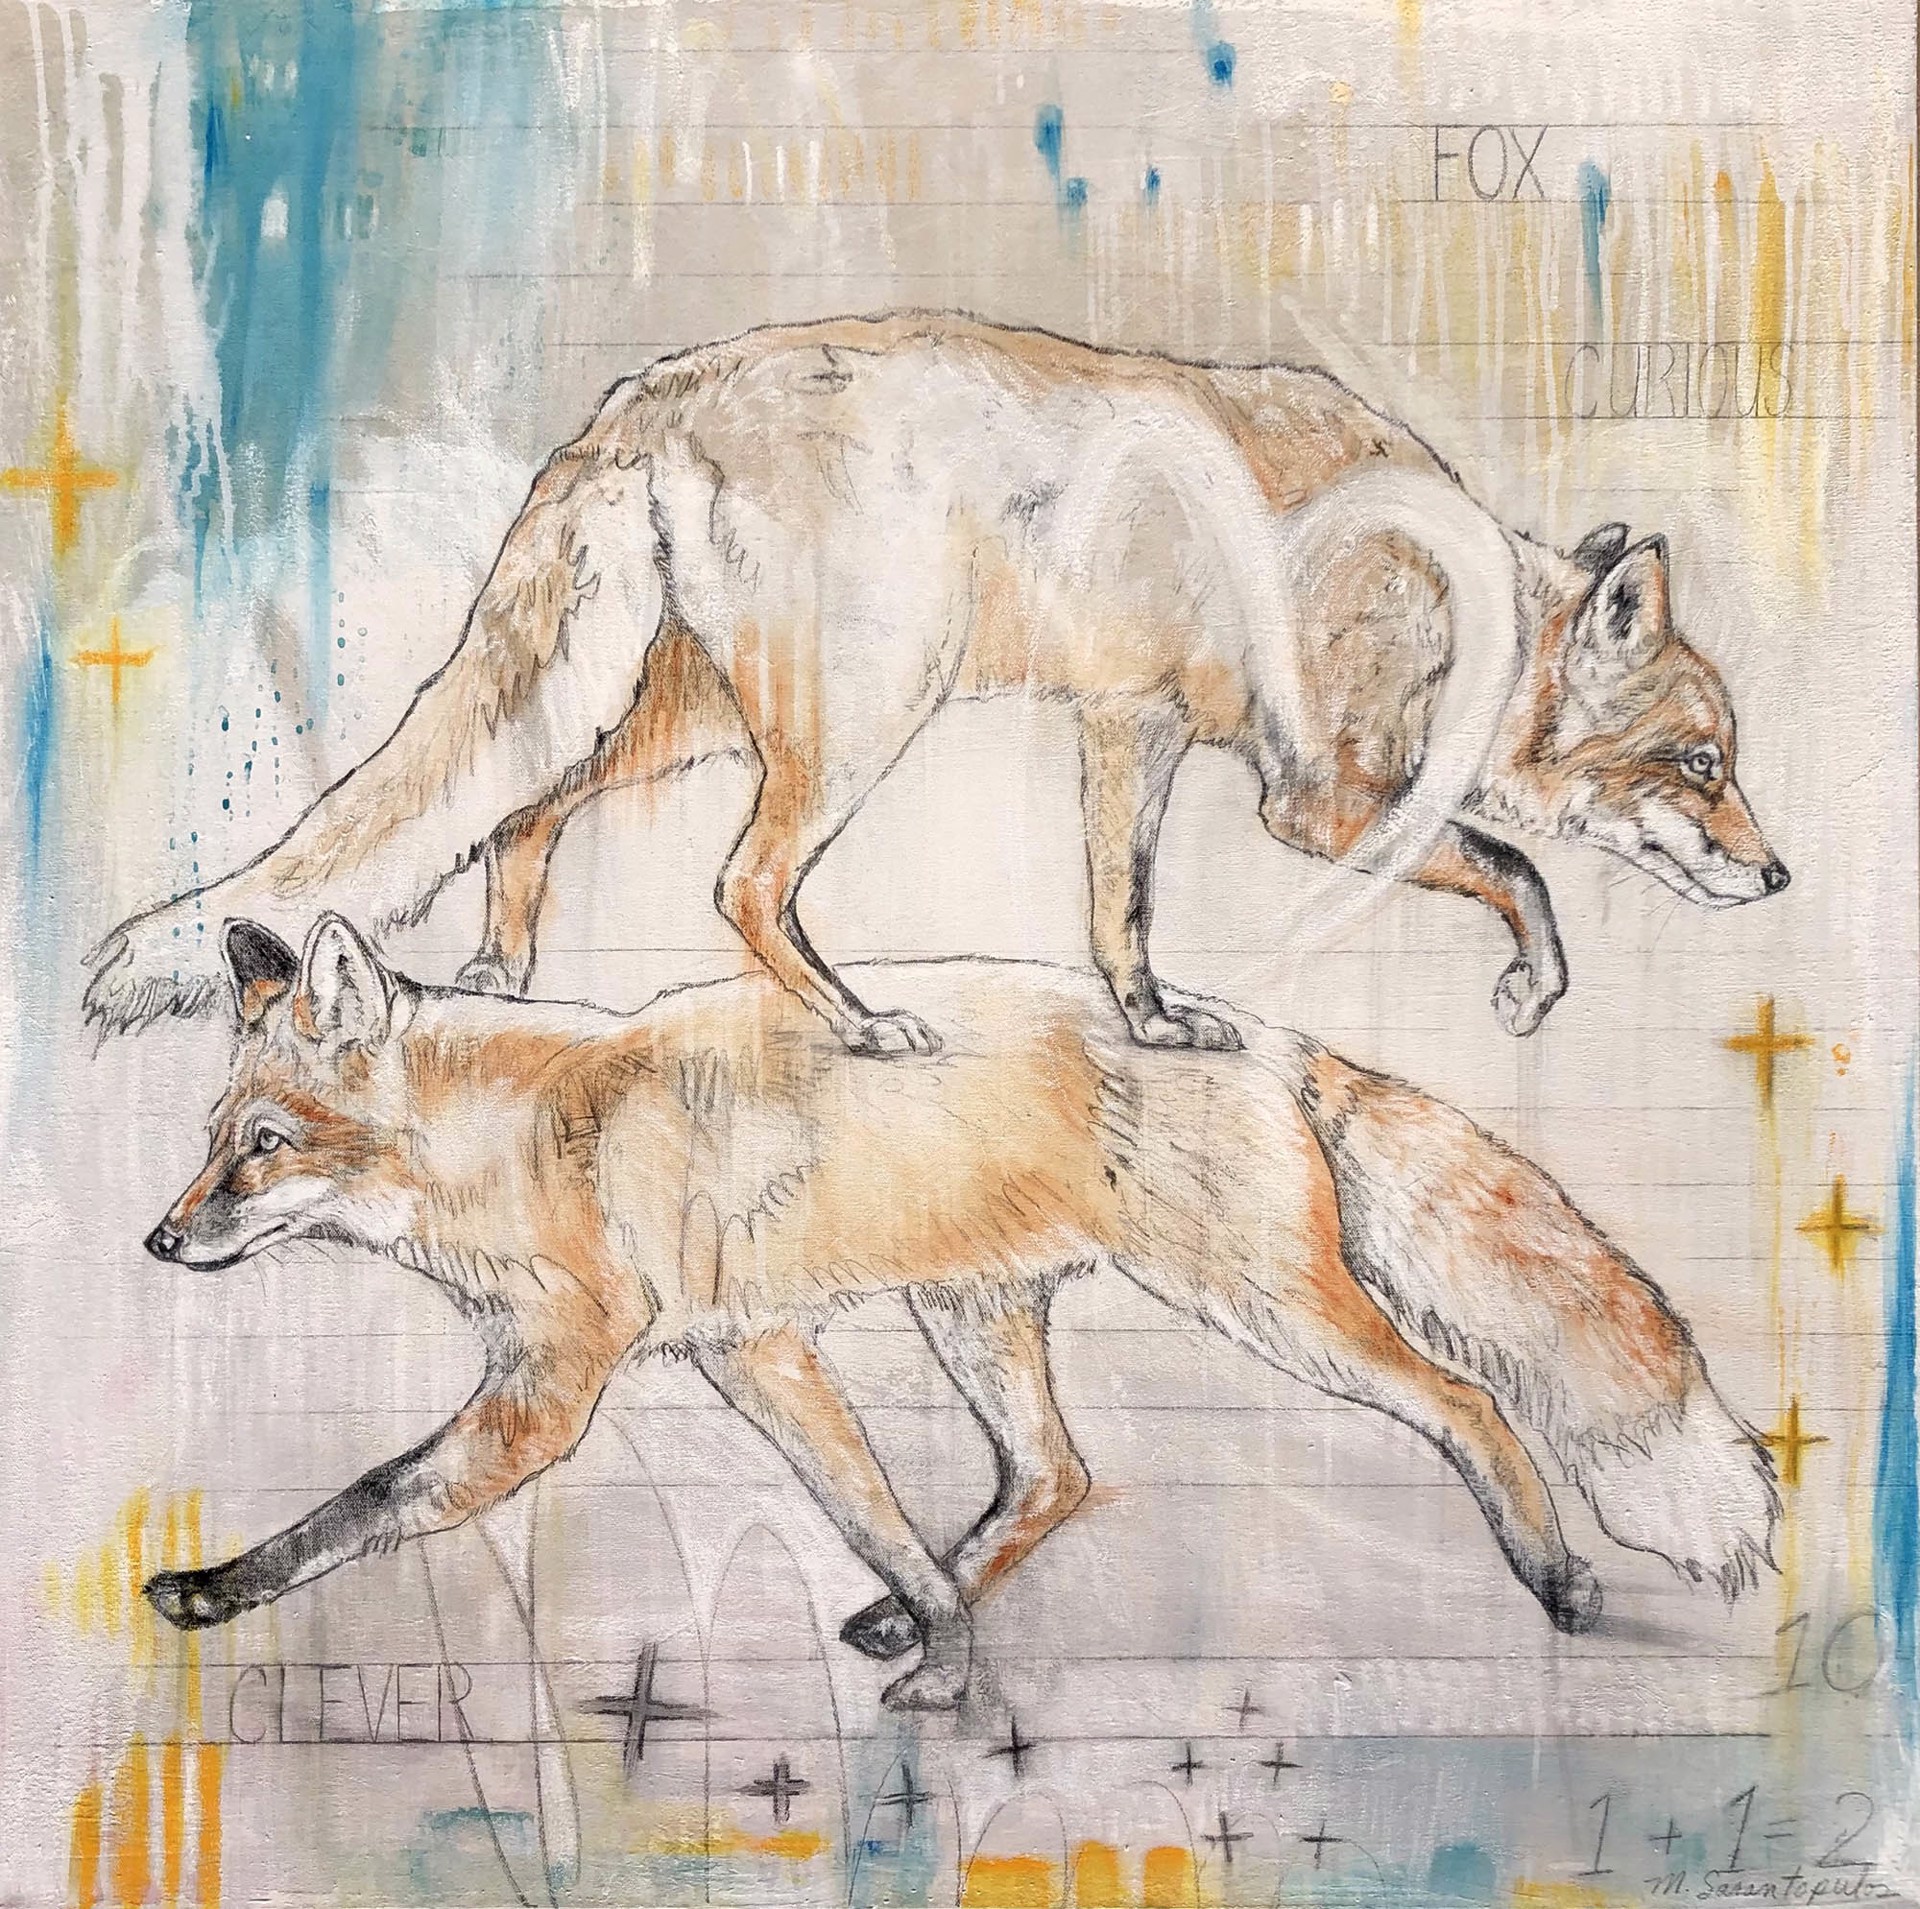 Original Mixed Media Painting Featuring Two Foxes Sketched Onto Abstract Background With Yellow And Blue Doodle Details And Graphite Text